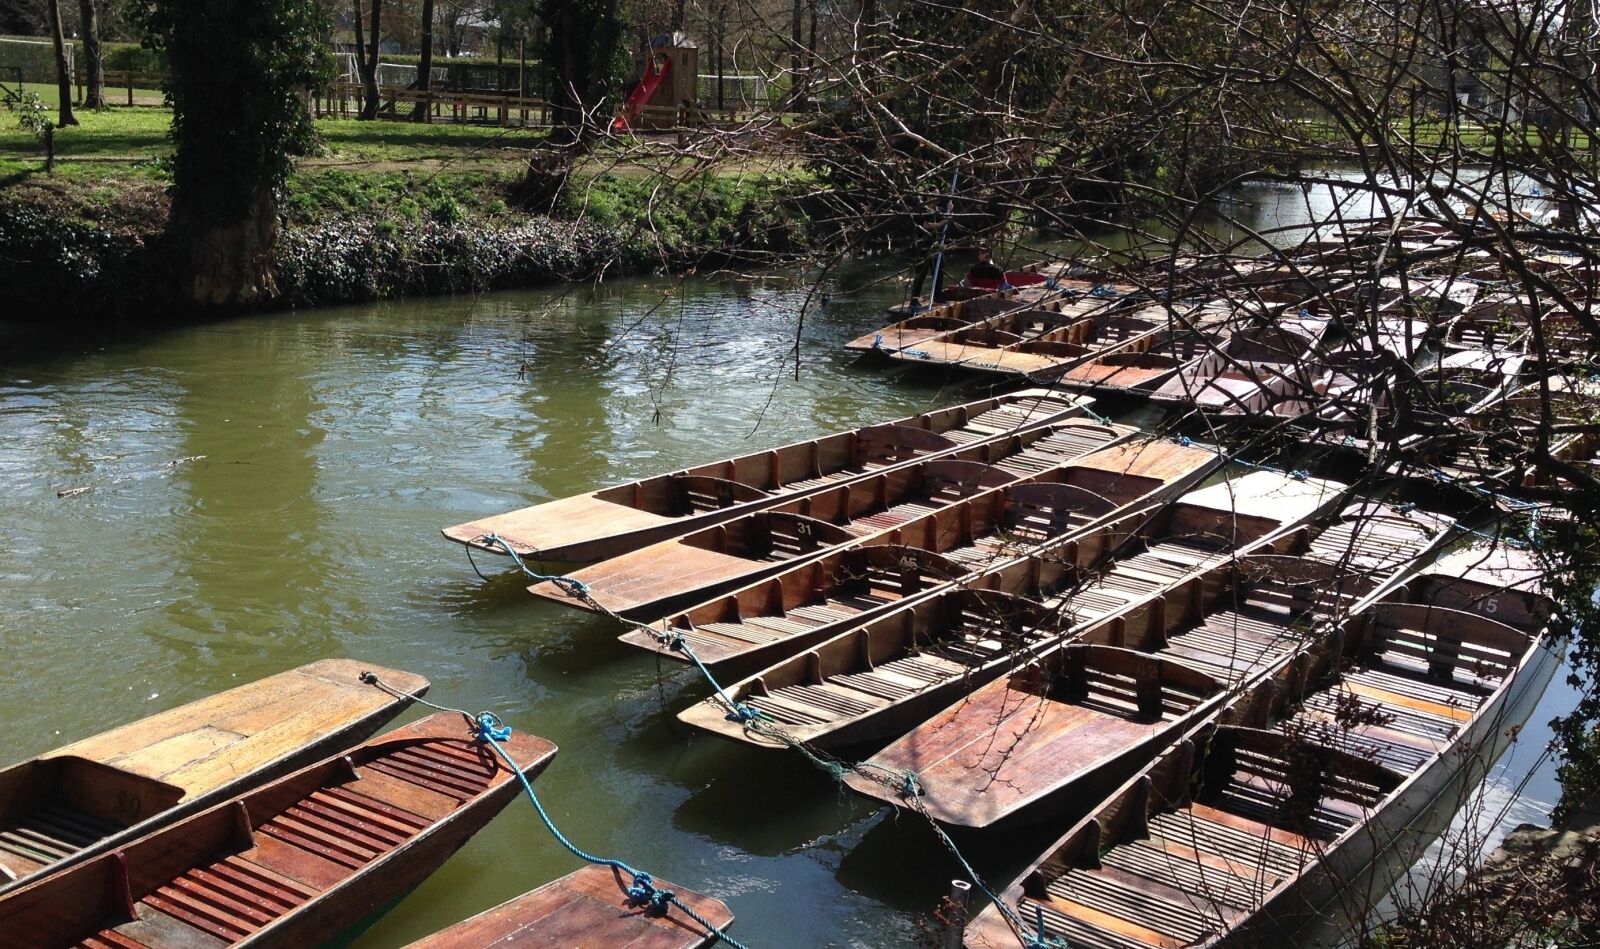 Apple iPhone 5 sample photo. Punts, punting, oxford photography